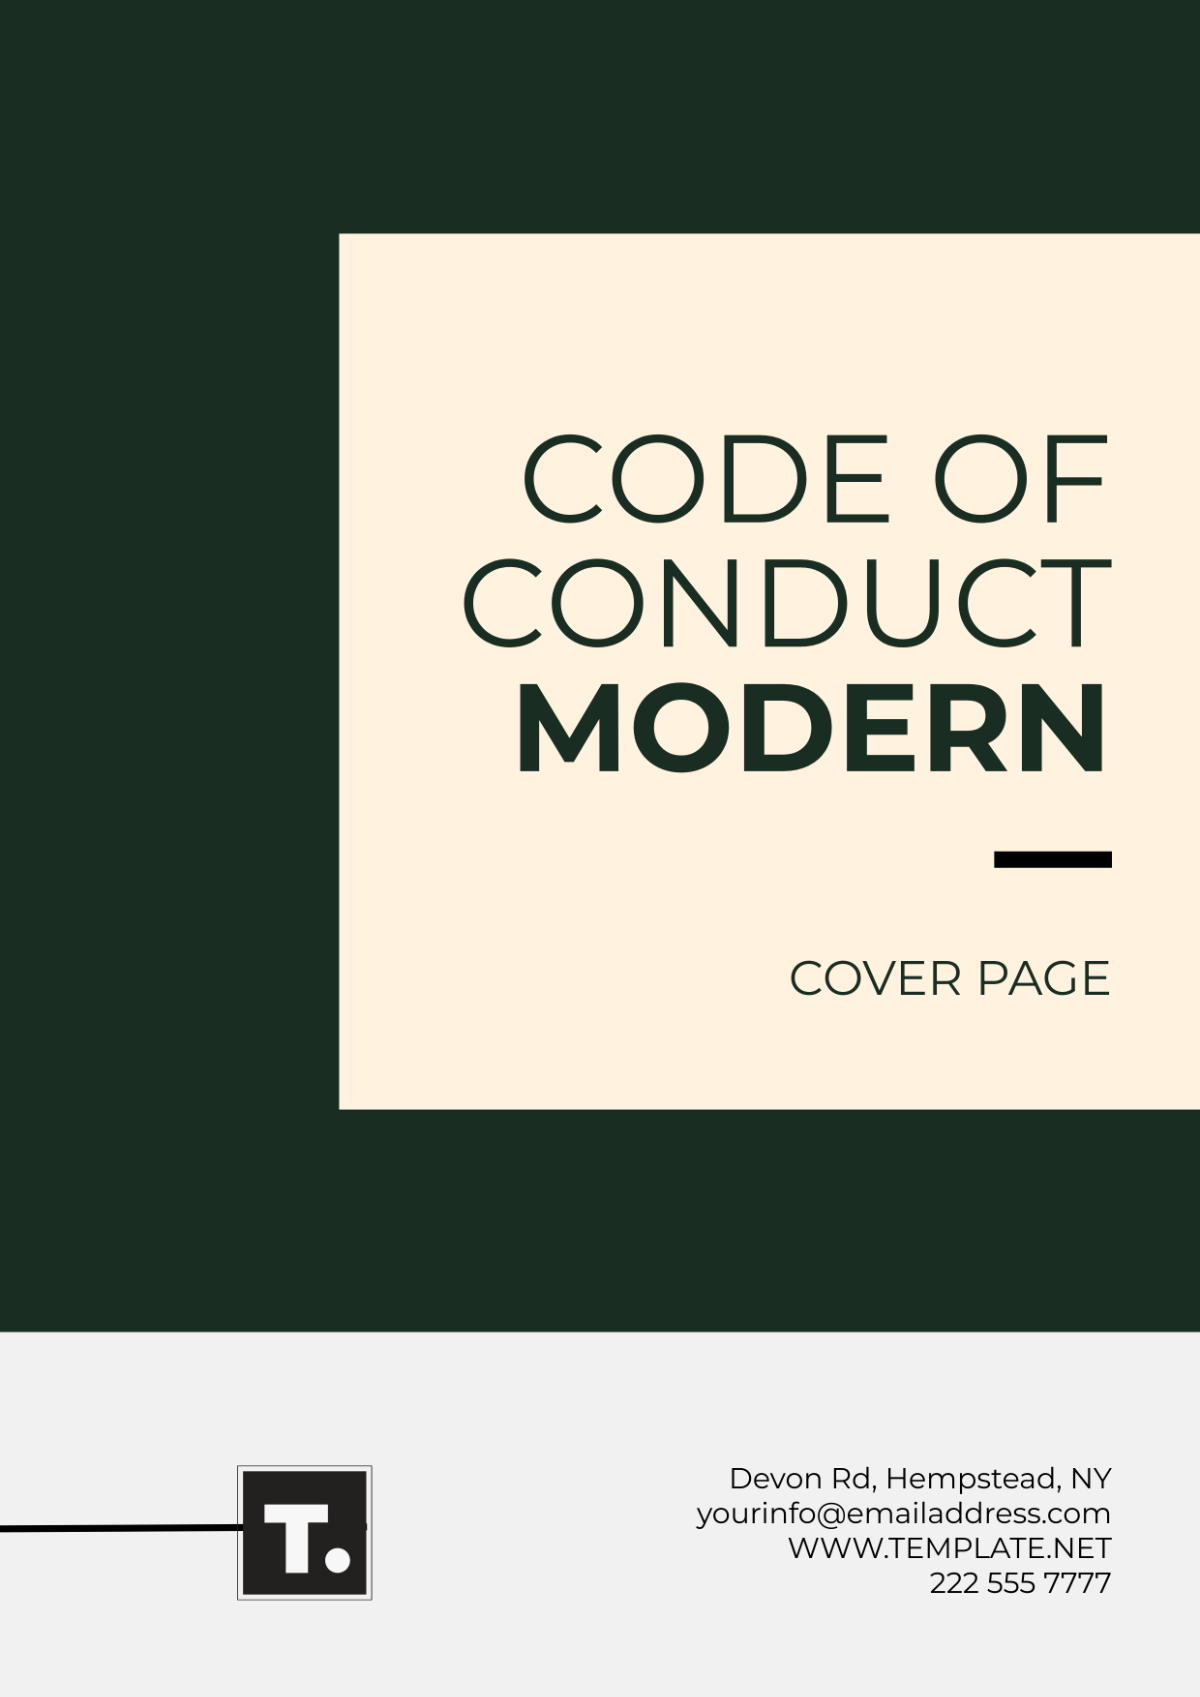 Code of Conduct Modern Cover Page